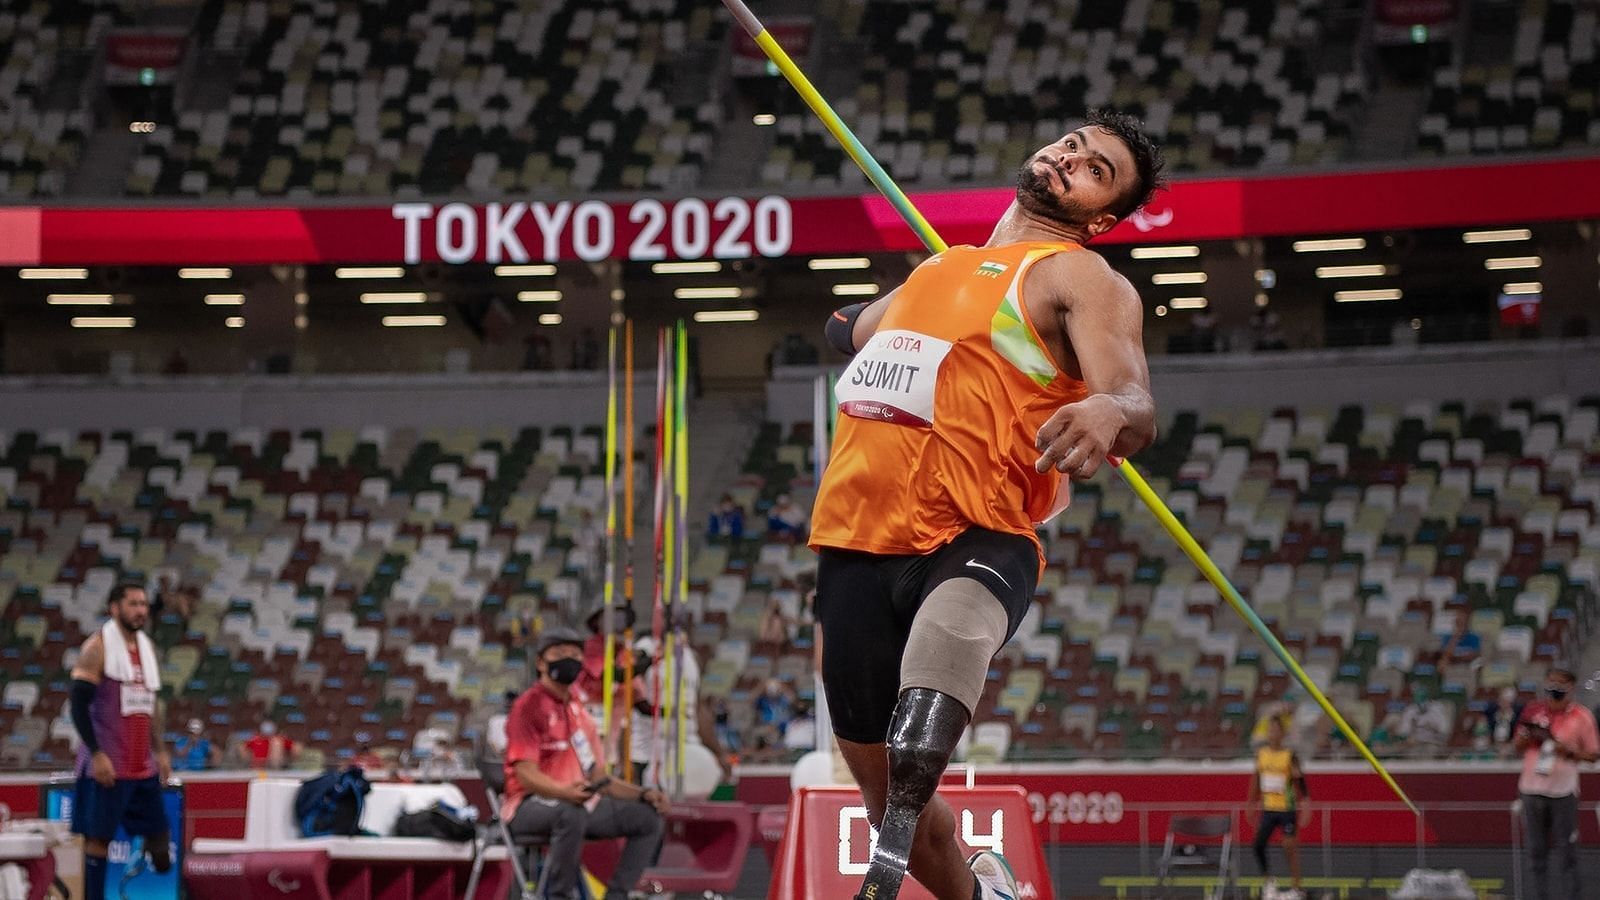 Sumit Antil won gold in the F64 Javelin throw event at the Asian Para Games 